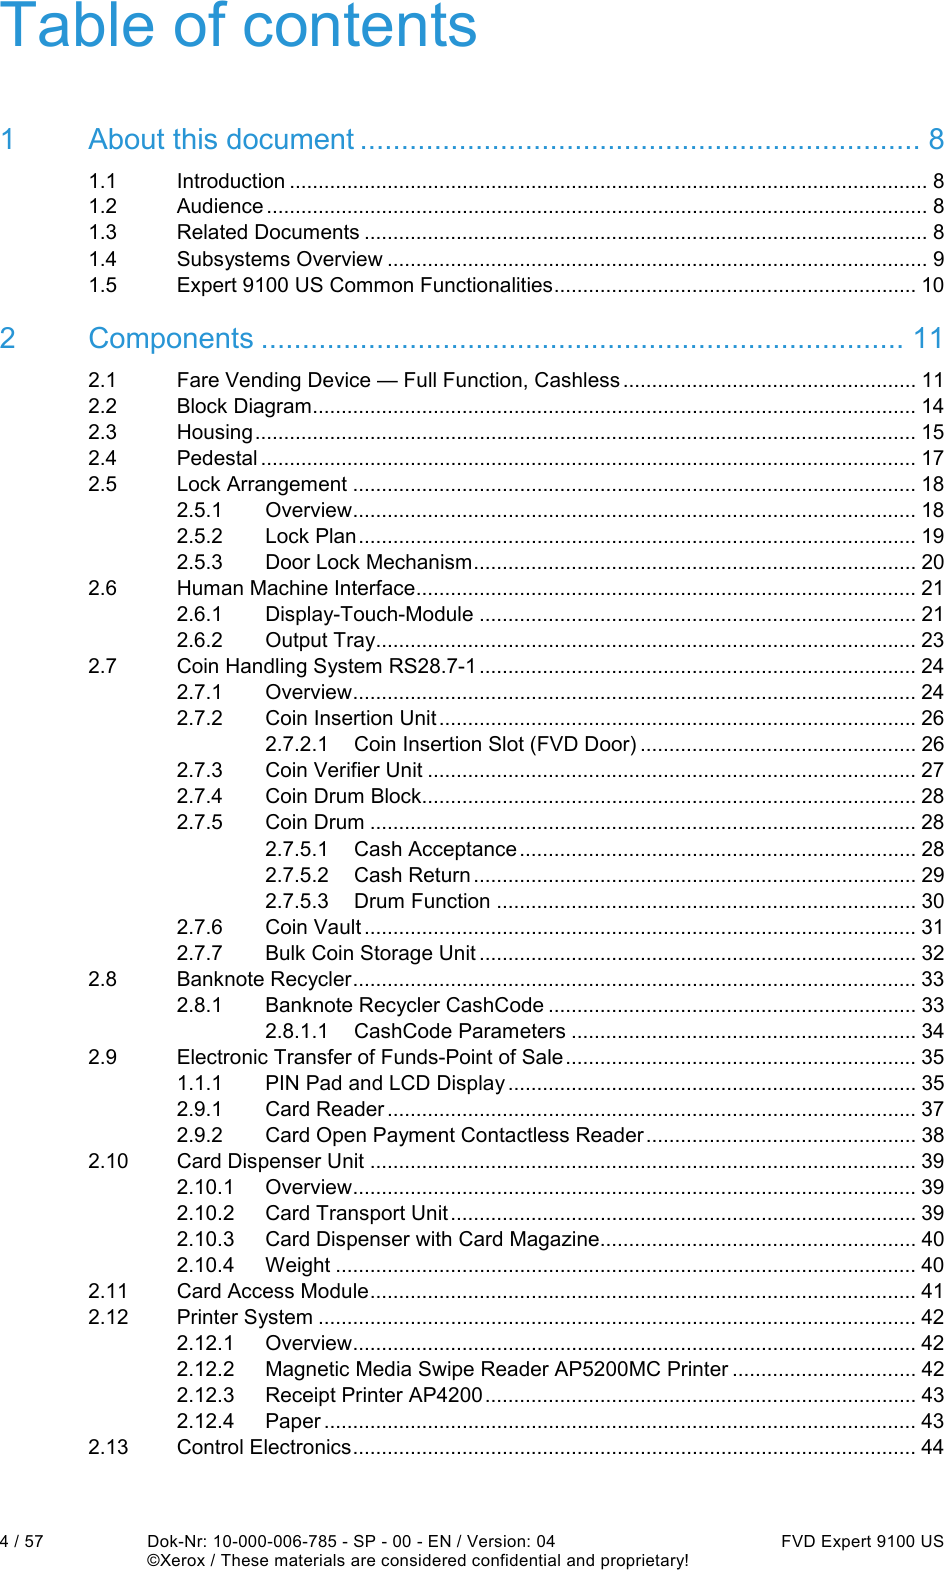  4 / 57  Dok-Nr: 10-000-006-785 - SP - 00 - EN / Version: 04  FVD Expert 9100 US   ©Xerox / These materials are considered confidential and proprietary! Table of contents 1 About this document .................................................................... 8 1.1 Introduction ............................................................................................................... 8 1.2 Audience ................................................................................................................... 8 1.3 Related Documents .................................................................................................. 8 1.4 Subsystems Overview .............................................................................................. 9 1.5 Expert 9100 US Common Functionalities ............................................................... 10 2 Components .............................................................................. 11 2.1 Fare Vending Device — Full Function, Cashless ................................................... 11 2.2 Block Diagram......................................................................................................... 14 2.3 Housing ................................................................................................................... 15 2.4 Pedestal .................................................................................................................. 17 2.5 Lock Arrangement .................................................................................................. 18 2.5.1 Overview .................................................................................................. 18 2.5.2 Lock Plan ................................................................................................. 19 2.5.3 Door Lock Mechanism ............................................................................. 20 2.6 Human Machine Interface ....................................................................................... 21 2.6.1 Display-Touch-Module ............................................................................ 21 2.6.2 Output Tray .............................................................................................. 23 2.7 Coin Handling System RS28.7-1 ............................................................................ 24 2.7.1 Overview .................................................................................................. 24 2.7.2 Coin Insertion Unit ................................................................................... 26 2.7.2.1 Coin Insertion Slot (FVD Door) ................................................ 26 2.7.3 Coin Verifier Unit ..................................................................................... 27 2.7.4 Coin Drum Block...................................................................................... 28 2.7.5 Coin Drum ............................................................................................... 28 2.7.5.1 Cash Acceptance ..................................................................... 28 2.7.5.2 Cash Return ............................................................................. 29 2.7.5.3 Drum Function ......................................................................... 30 2.7.6 Coin Vault ................................................................................................ 31 2.7.7 Bulk Coin Storage Unit ............................................................................ 32 2.8 Banknote Recycler .................................................................................................. 33 2.8.1 Banknote Recycler CashCode ................................................................ 33 2.8.1.1 CashCode Parameters ............................................................ 34 2.9 Electronic Transfer of Funds-Point of Sale ............................................................. 35 1.1.1 PIN Pad and LCD Display ....................................................................... 35 2.9.1 Card Reader ............................................................................................ 37 2.9.2 Card Open Payment Contactless Reader ............................................... 38 2.10 Card Dispenser Unit ............................................................................................... 39 2.10.1 Overview .................................................................................................. 39 2.10.2 Card Transport Unit ................................................................................. 39 2.10.3 Card Dispenser with Card Magazine....................................................... 40 2.10.4 Weight ..................................................................................................... 40 2.11 Card Access Module ............................................................................................... 41 2.12 Printer System ........................................................................................................ 42 2.12.1 Overview .................................................................................................. 42 2.12.2 Magnetic Media Swipe Reader AP5200MC Printer ................................ 42 2.12.3 Receipt Printer AP4200 ........................................................................... 43 2.12.4 Paper ....................................................................................................... 43 2.13 Control Electronics .................................................................................................. 44 